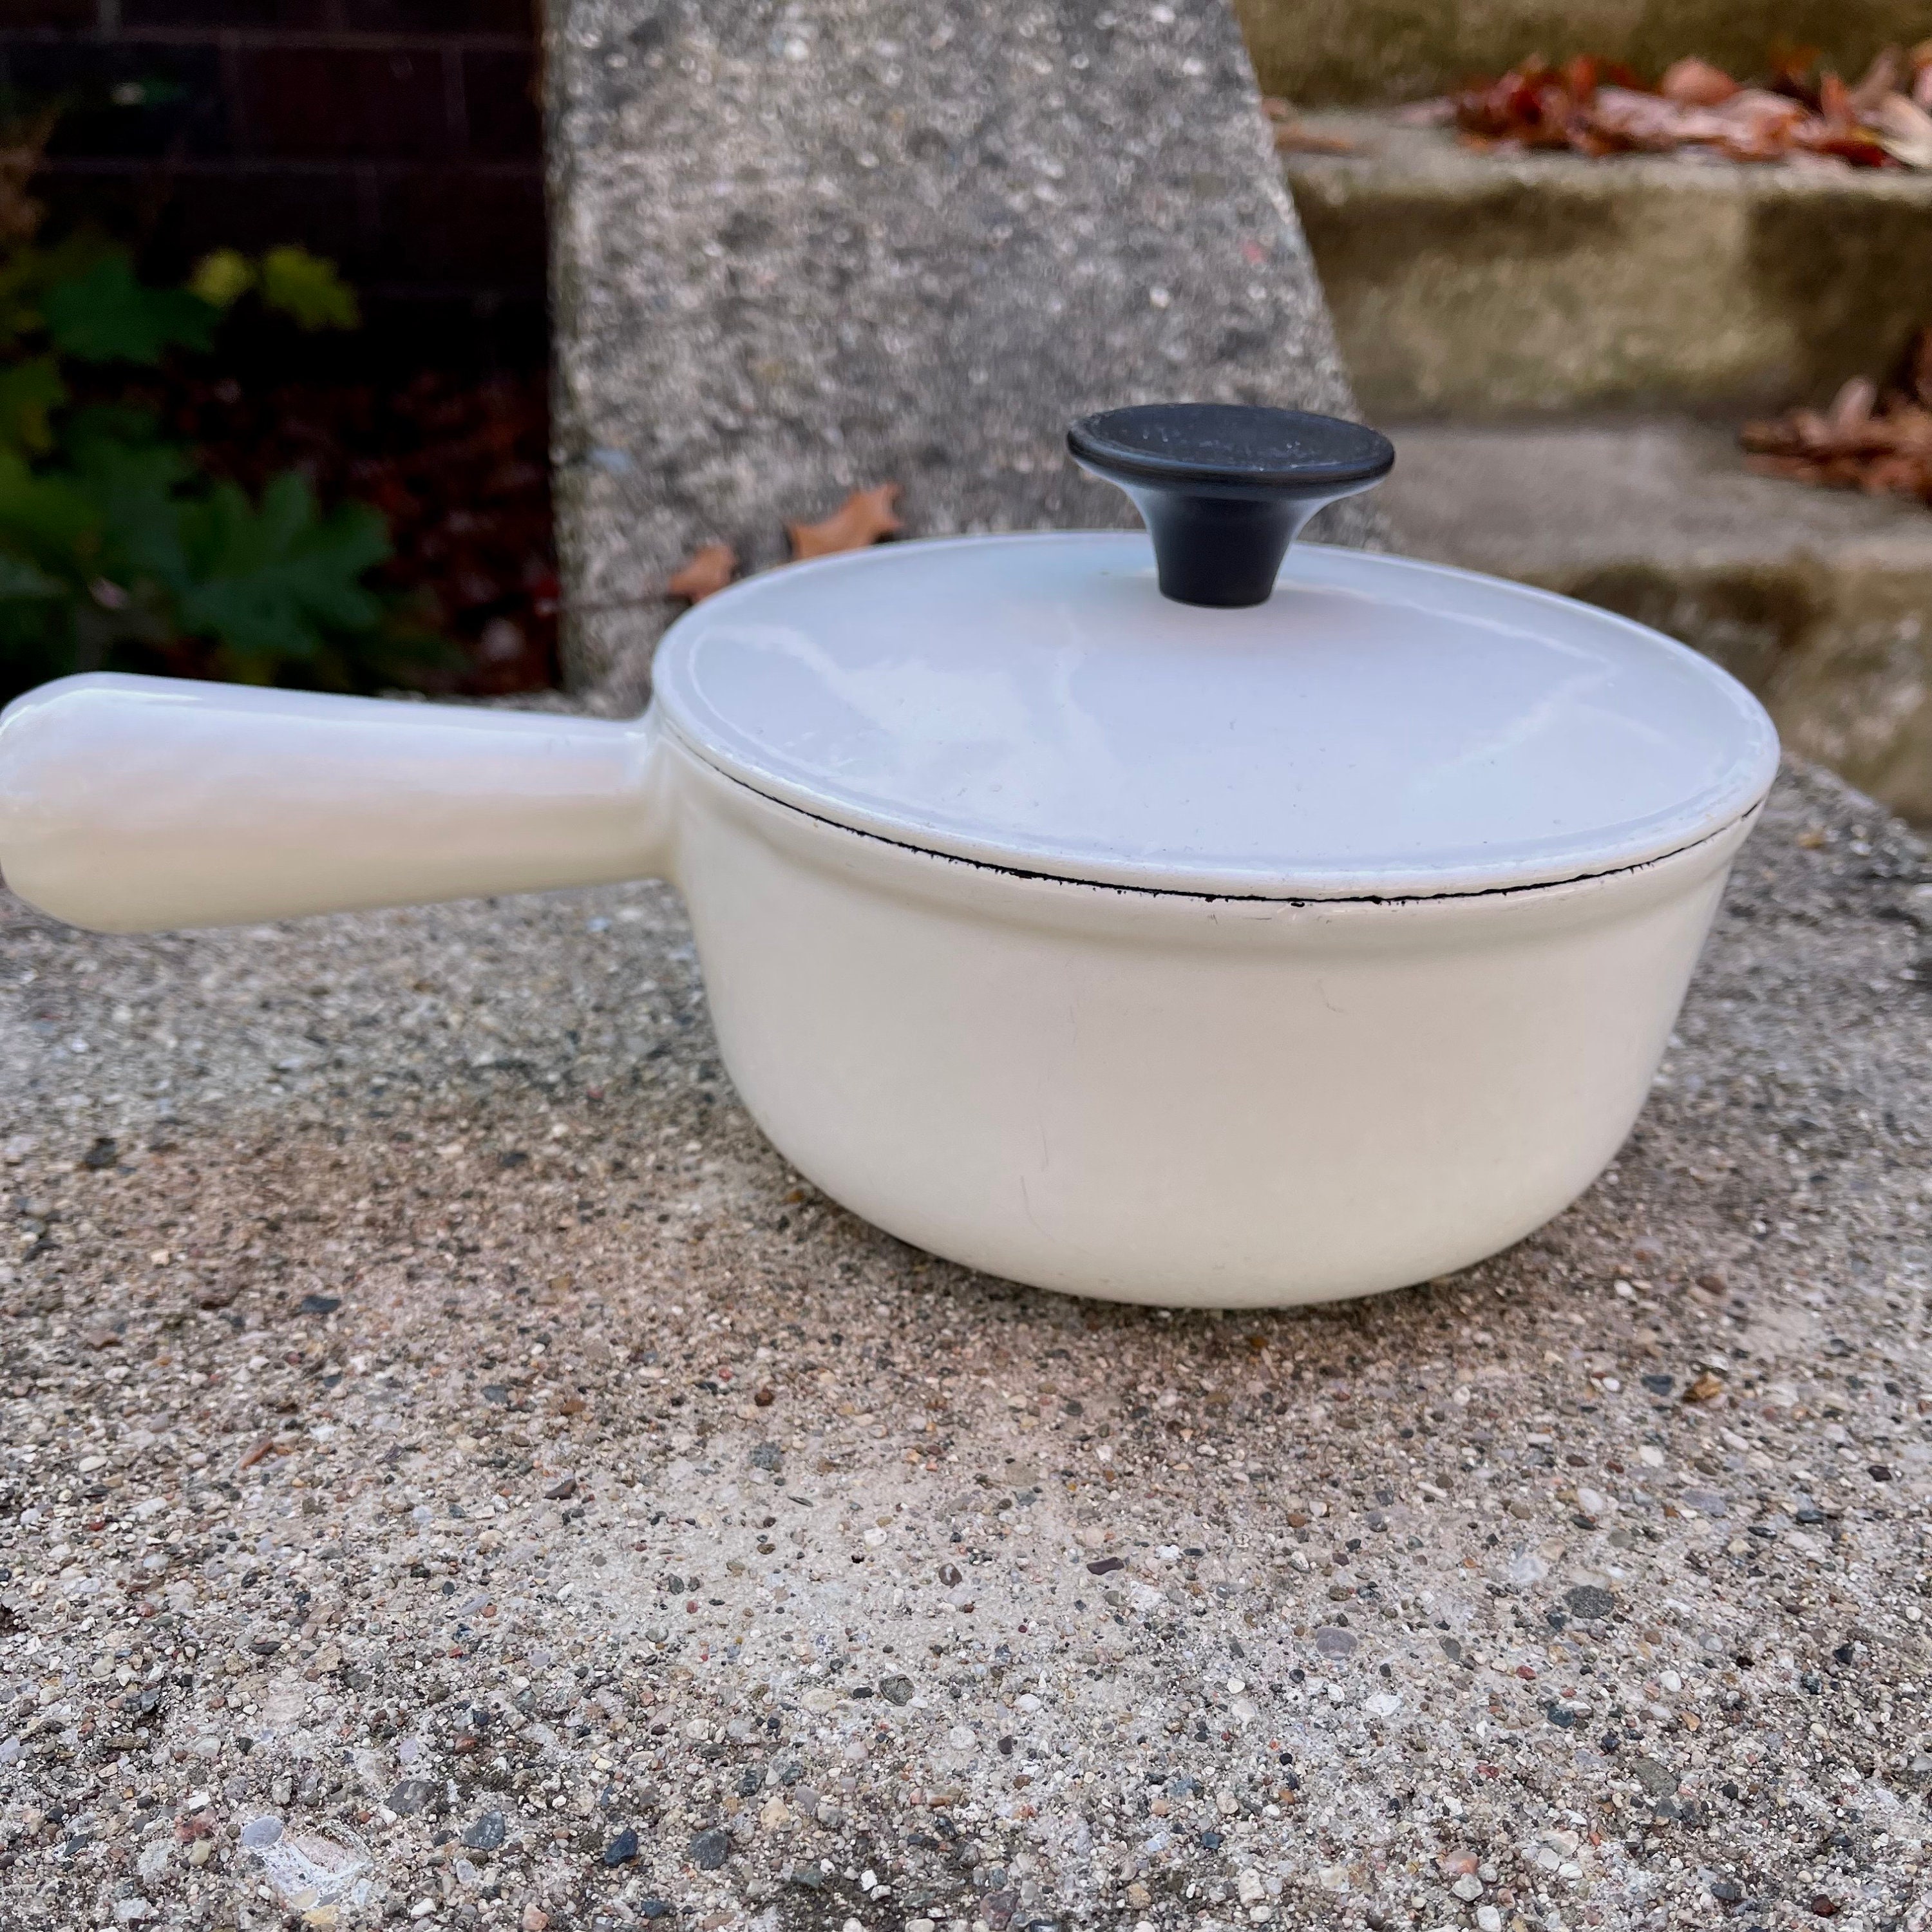 This Le Creuset cast-iron Dutch oven has lid that doubles as a grill pan—and  it's $42 off today